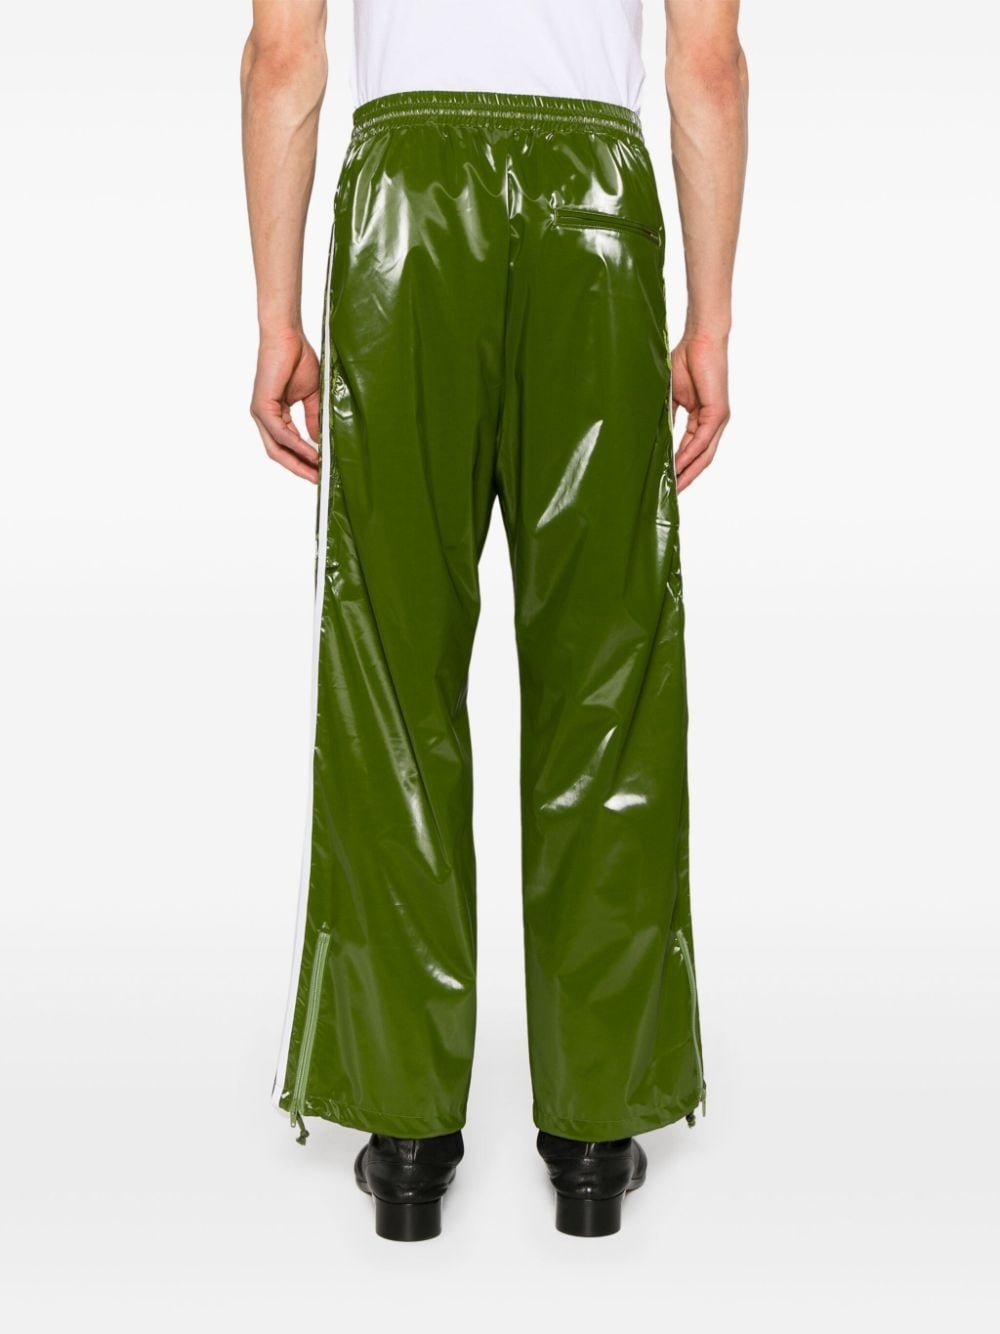 Laminate Track embroidered track pants - 4